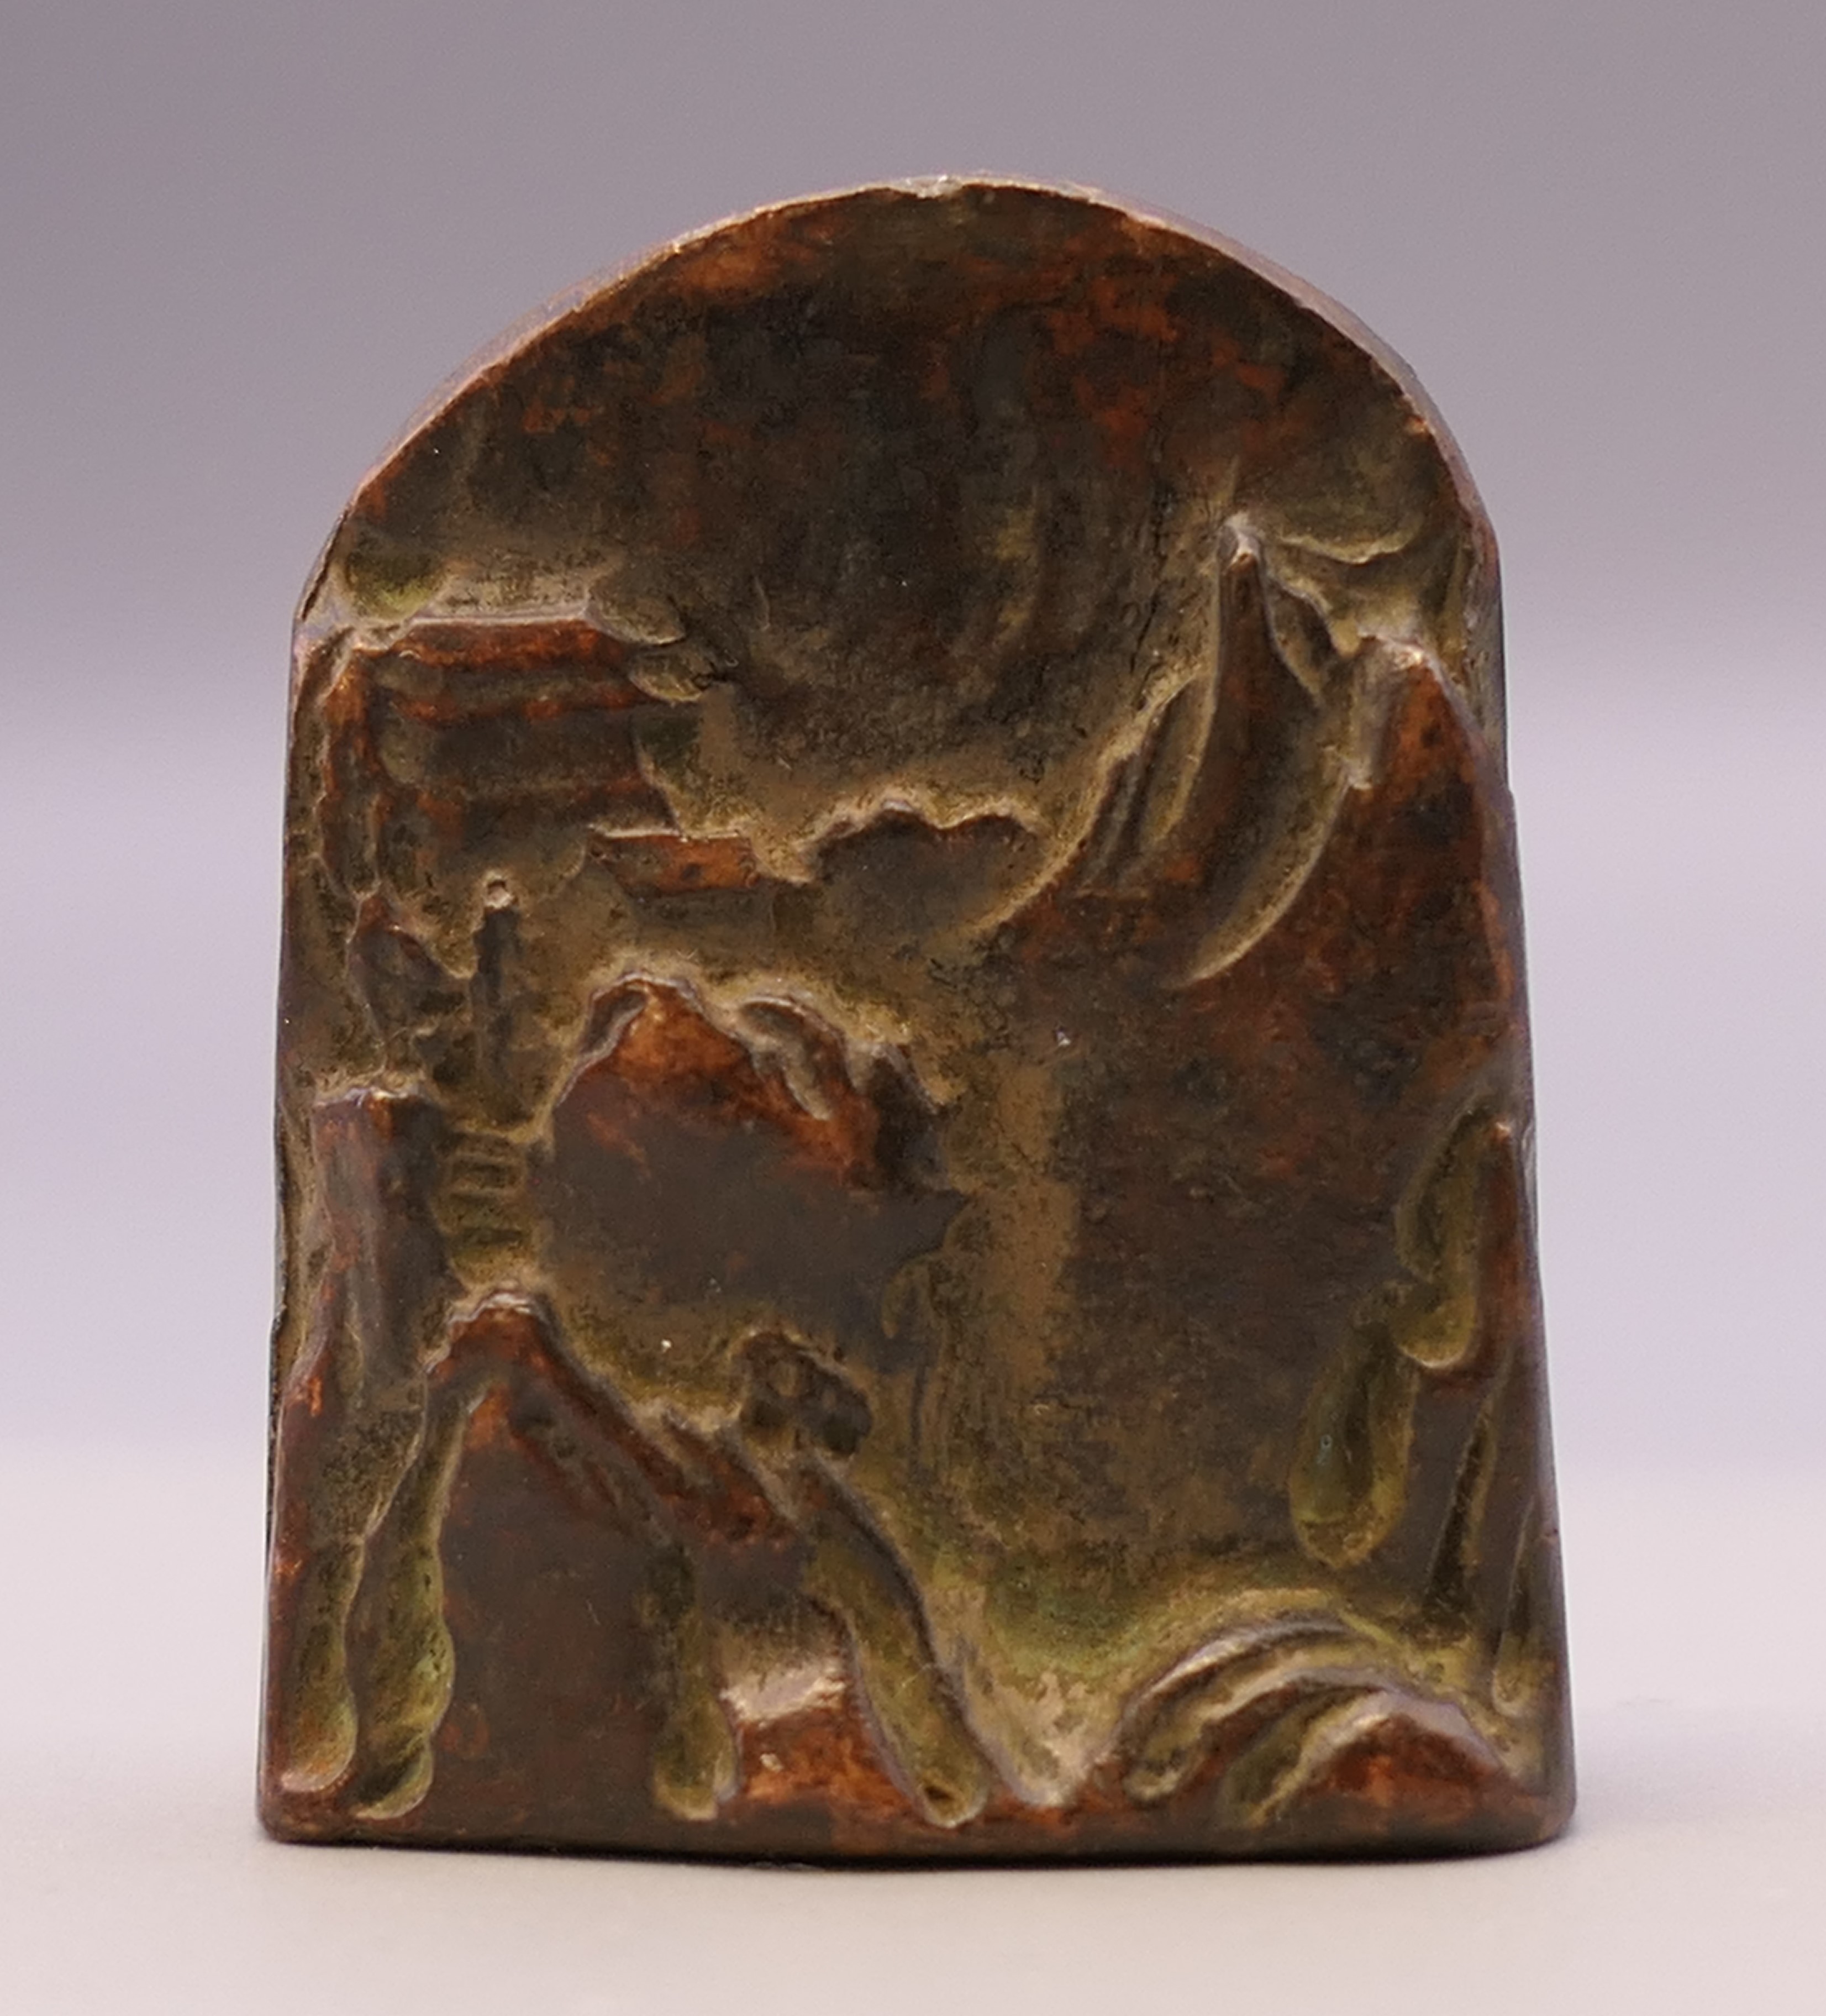 A bronze seal decorated with mountains. 4 cm high.